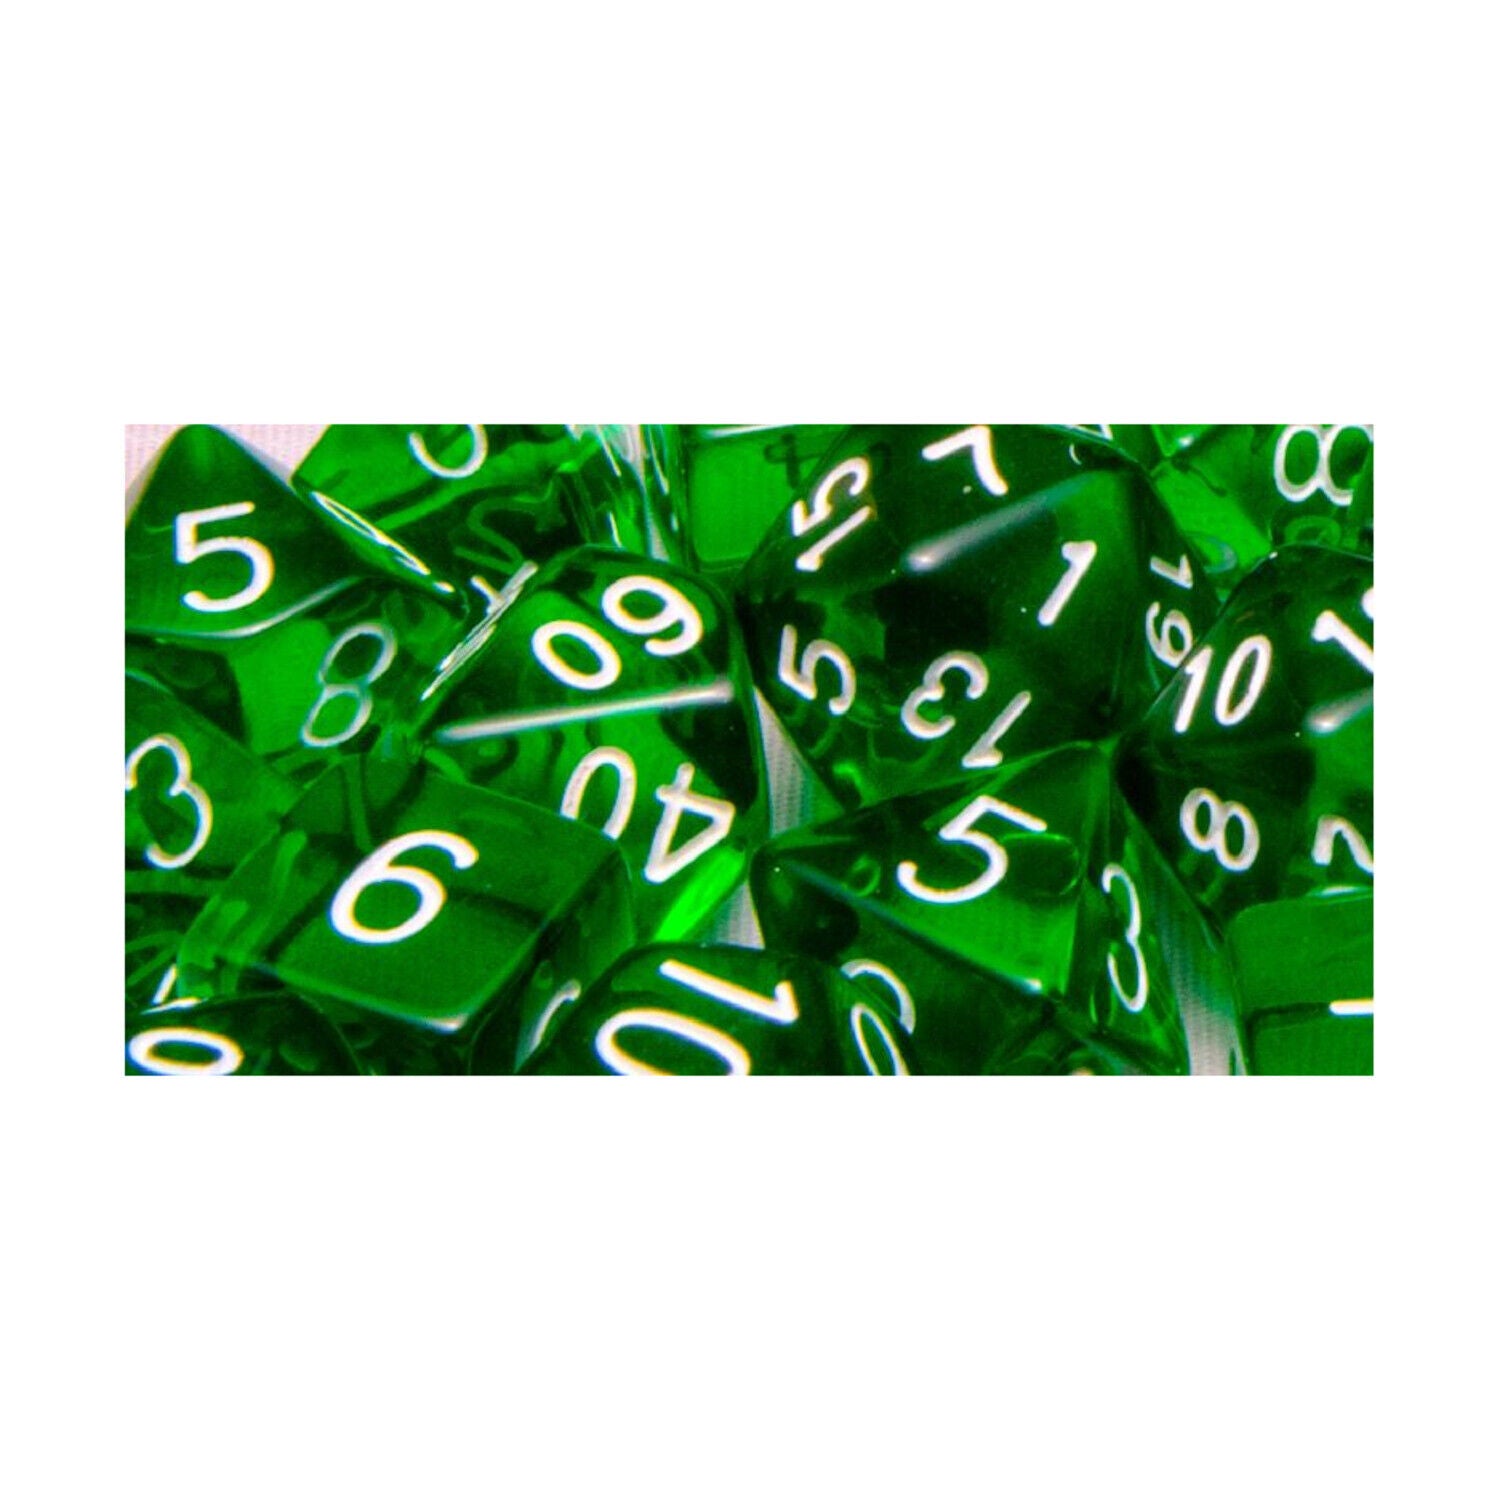 R4I Dice Polyhedral Dice - Translucent Dark Green w/White (7) New | CCGPrime